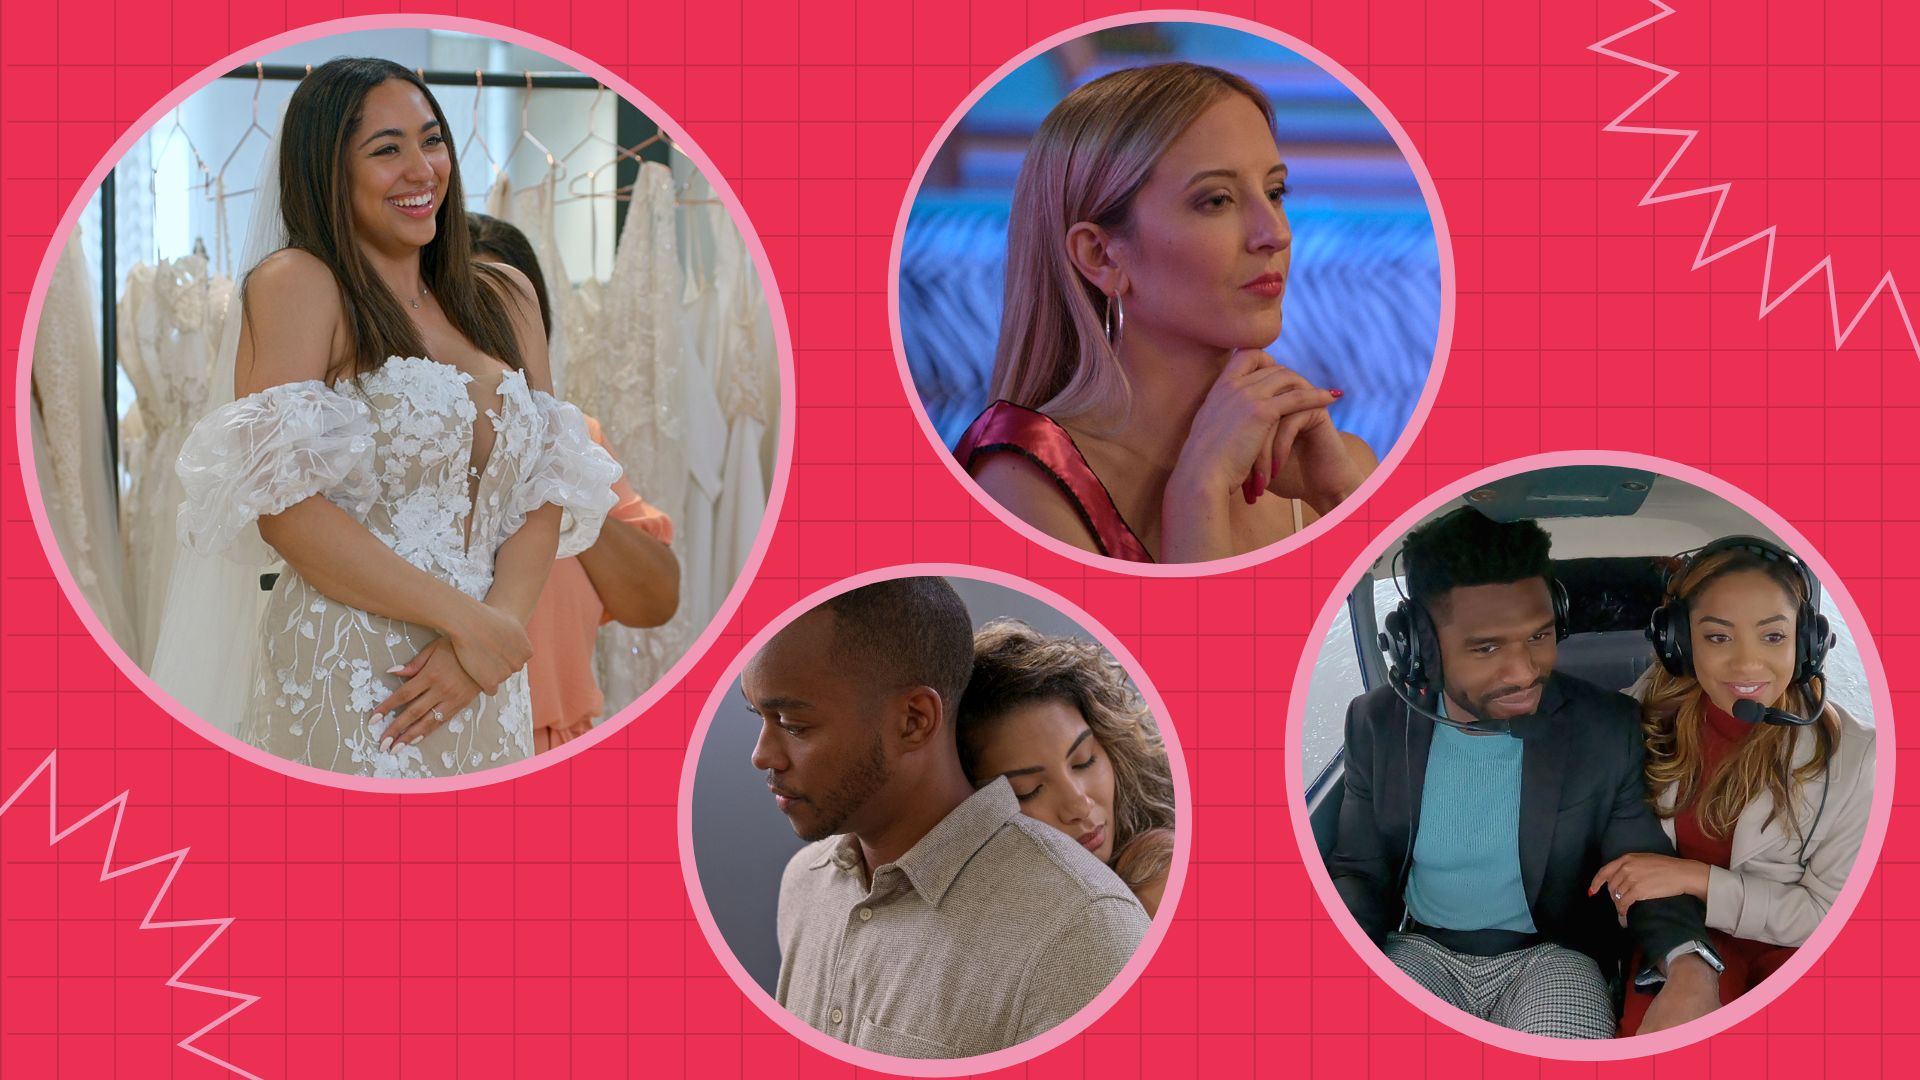 Netflix Love Is Blind season 4 cast and couples in bubbles on a pink background